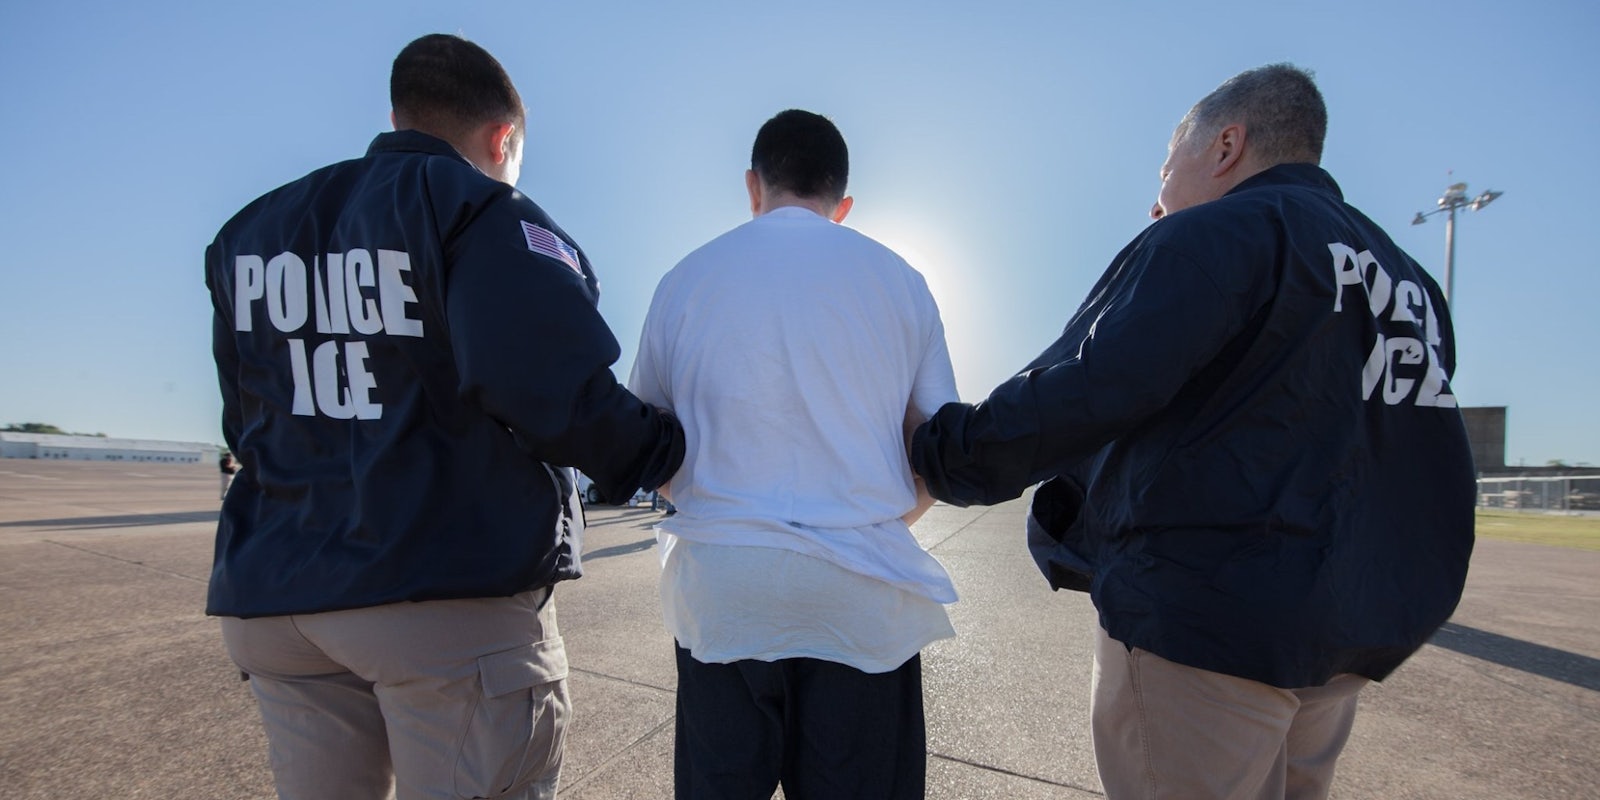 Two ICE officers are seen from the back arresting a man in a white t-shirt